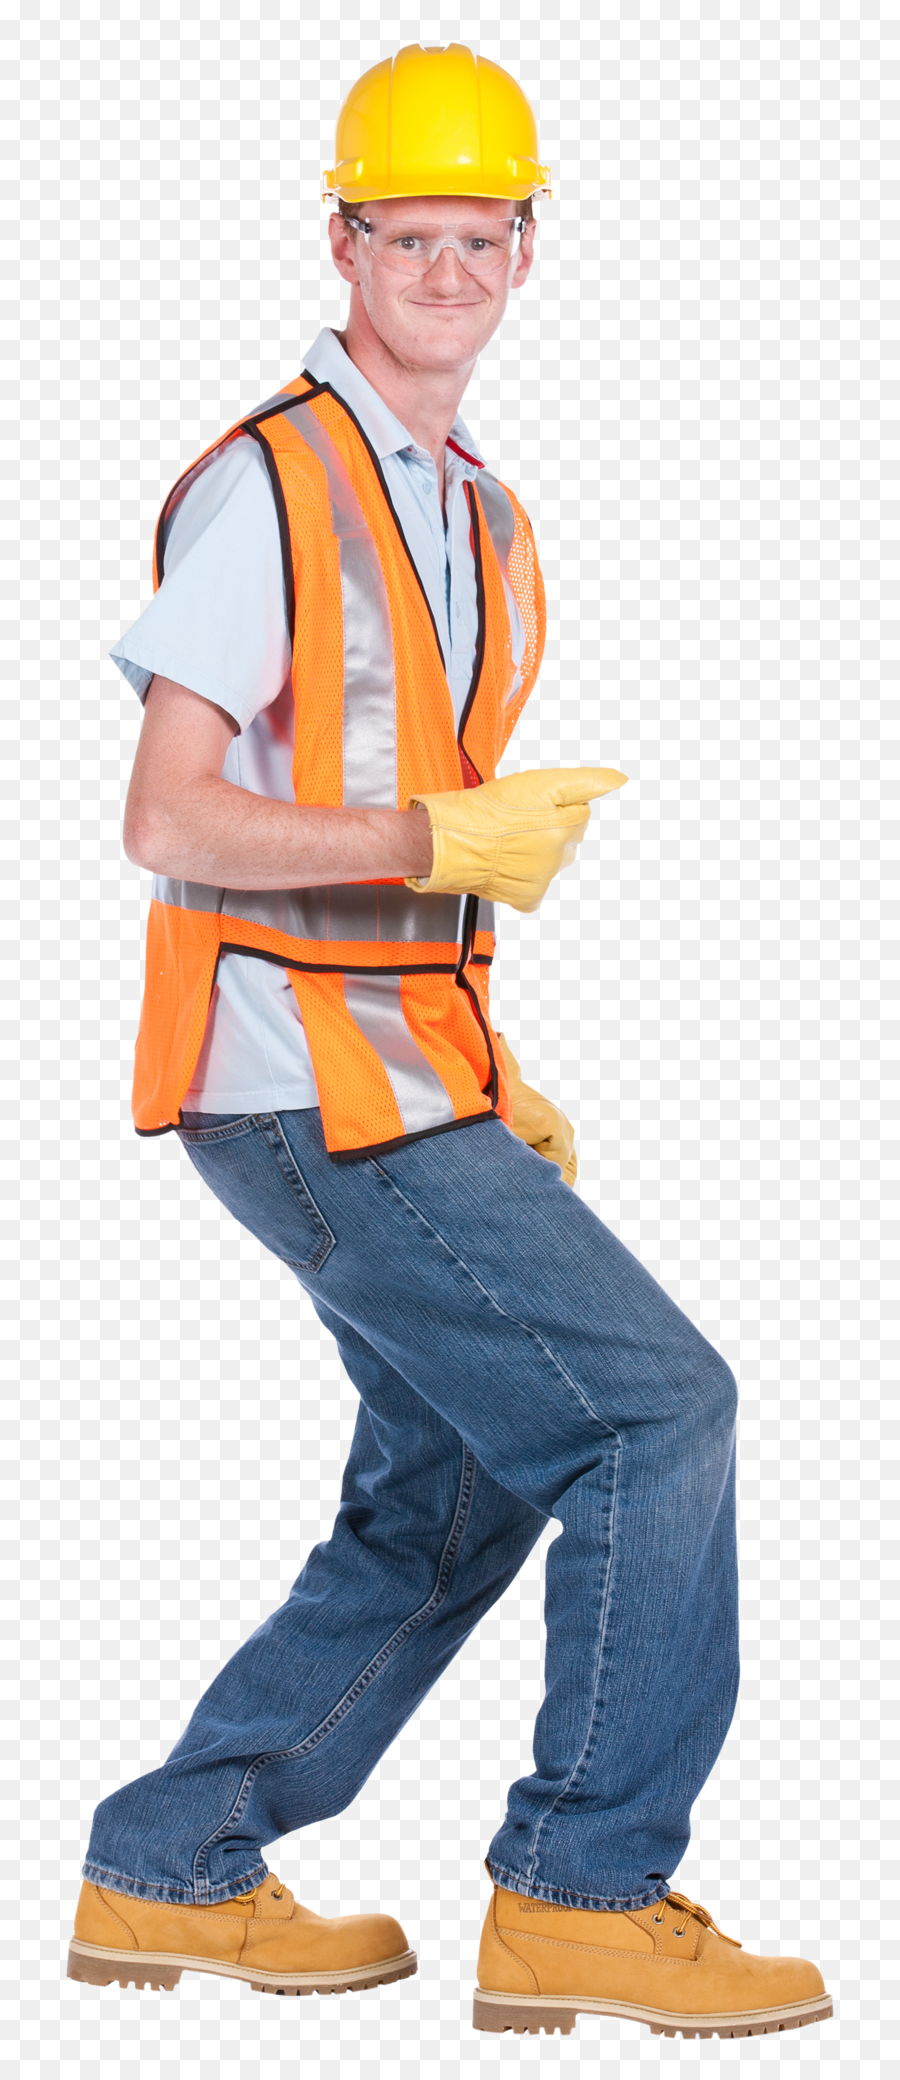 Construction And Safety Training - Workwear Emoji,Construction Worker Scenes And Emotions